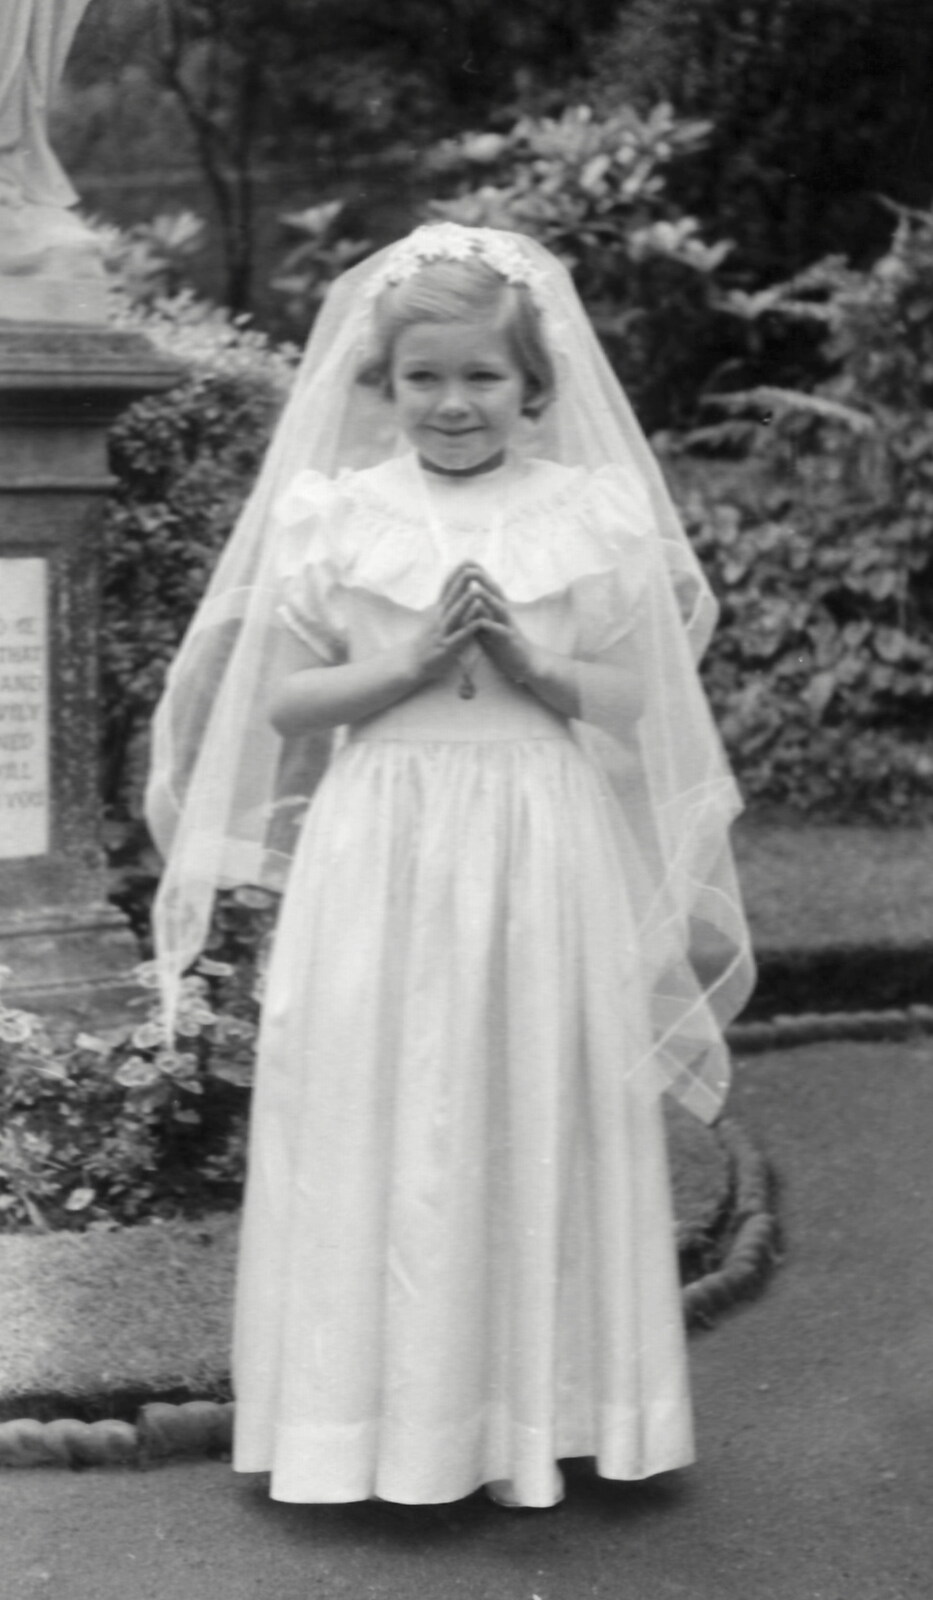 Family History: The 1940s and 1950s - 24th January 2020: Janet in a communion dress